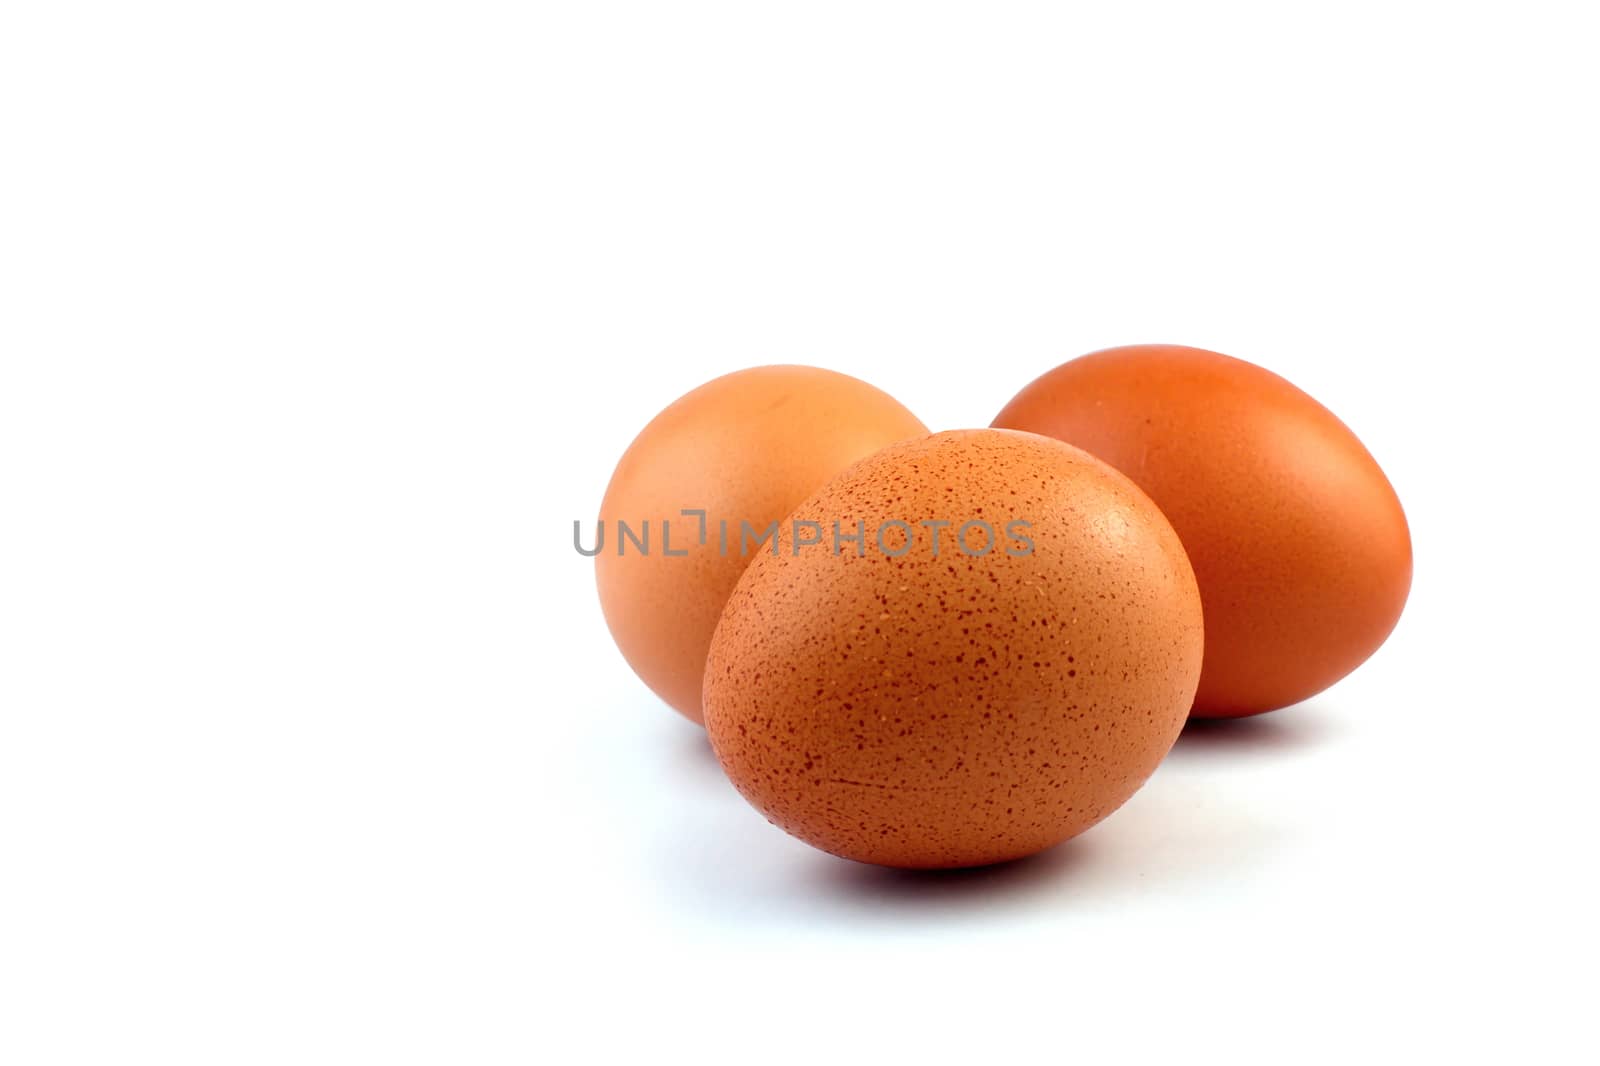 Eggs isolate white background, select focus on front egg